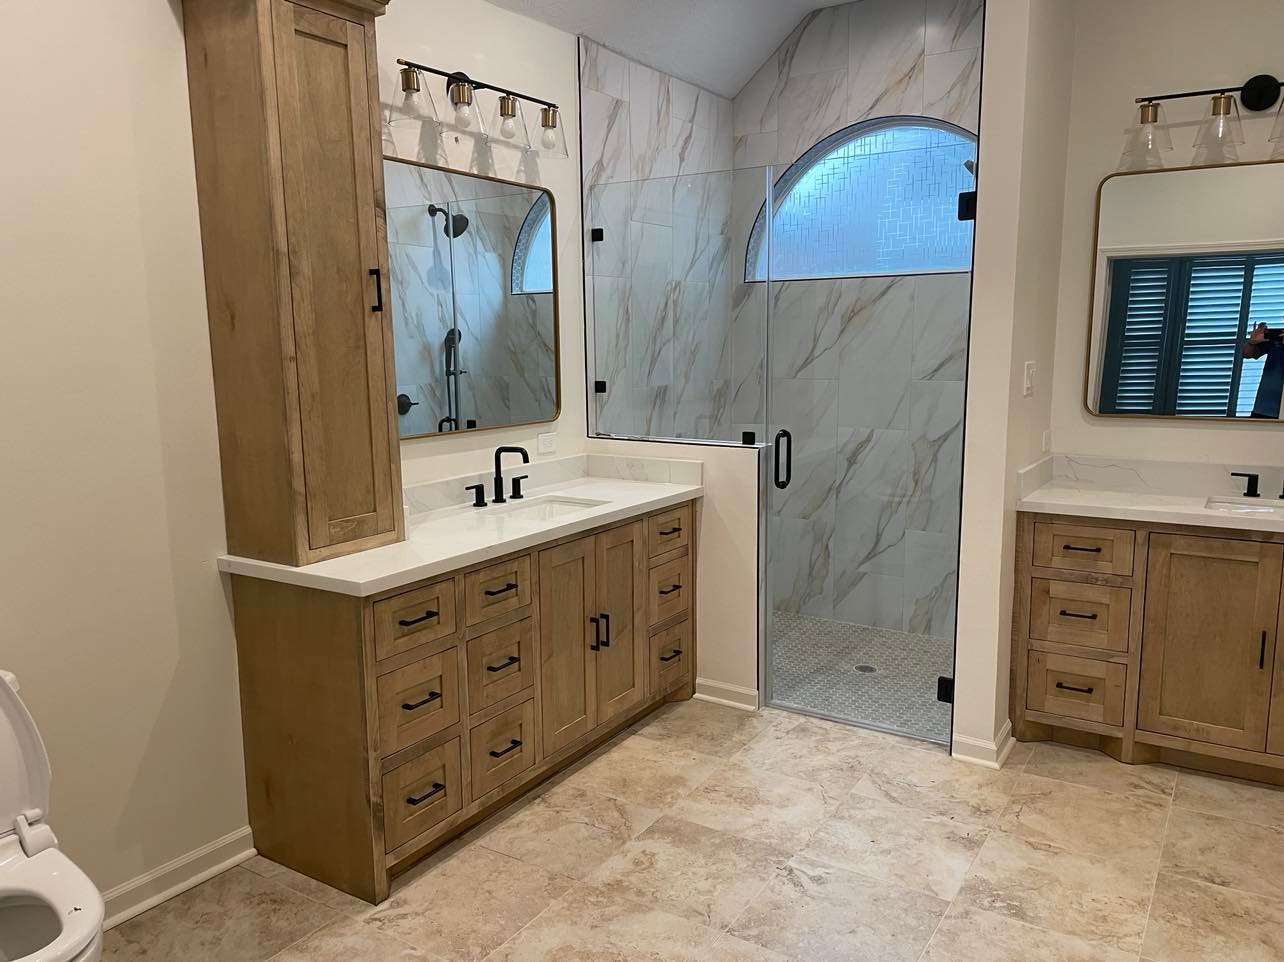 A full accessible bathroom with style! 